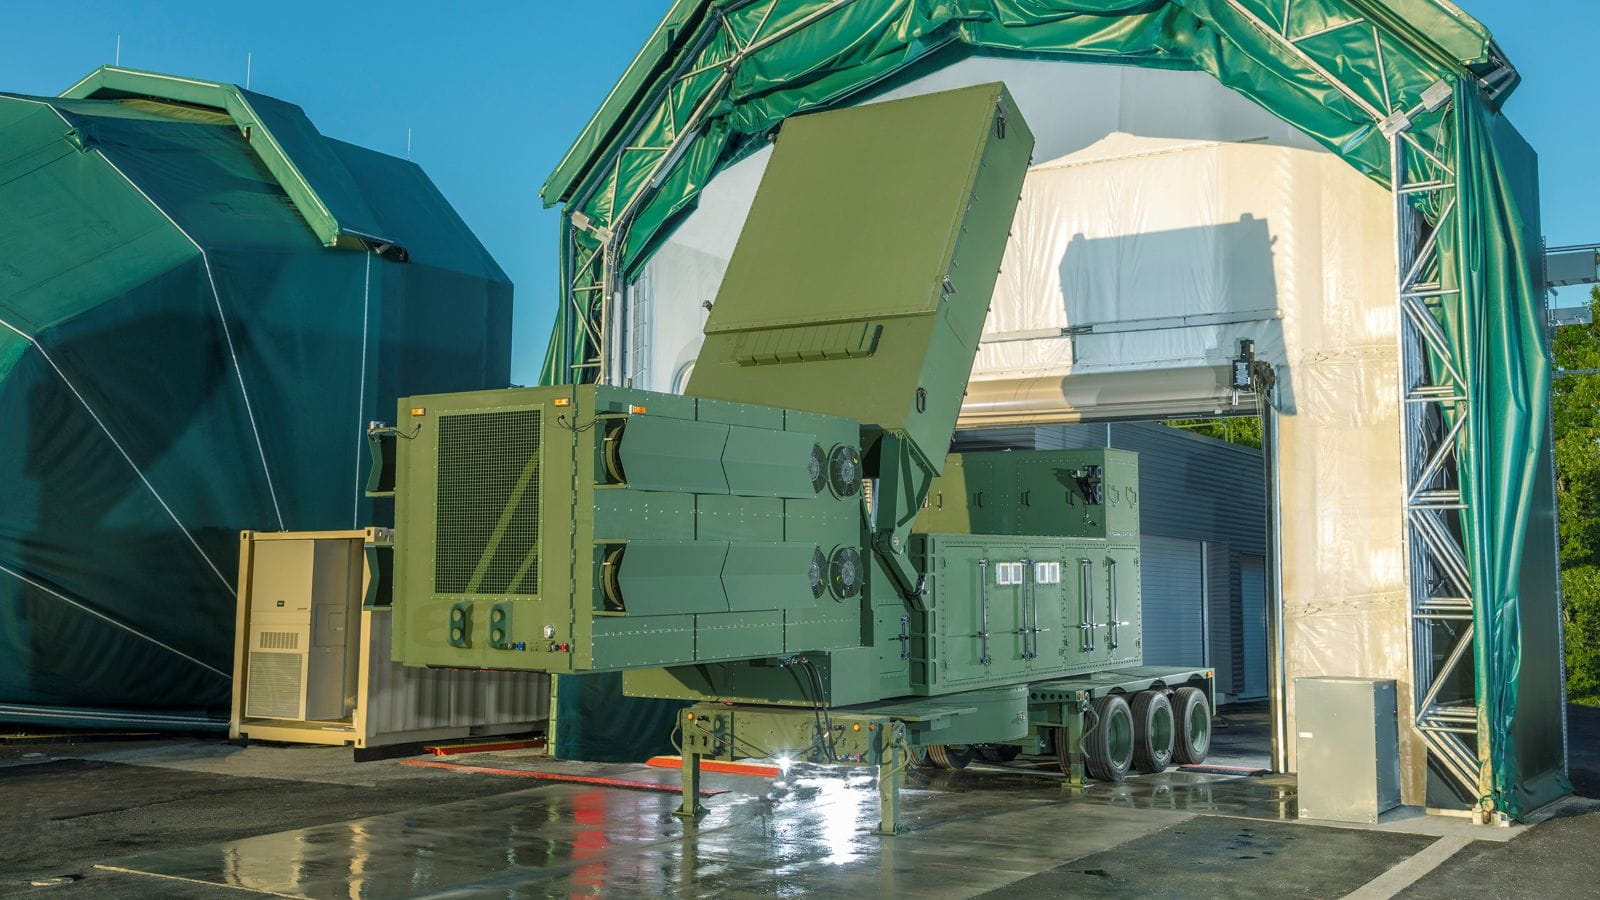 All six LTAMDS radars are undergoing simultaneous testing at Raytheon and U.S. government sites.